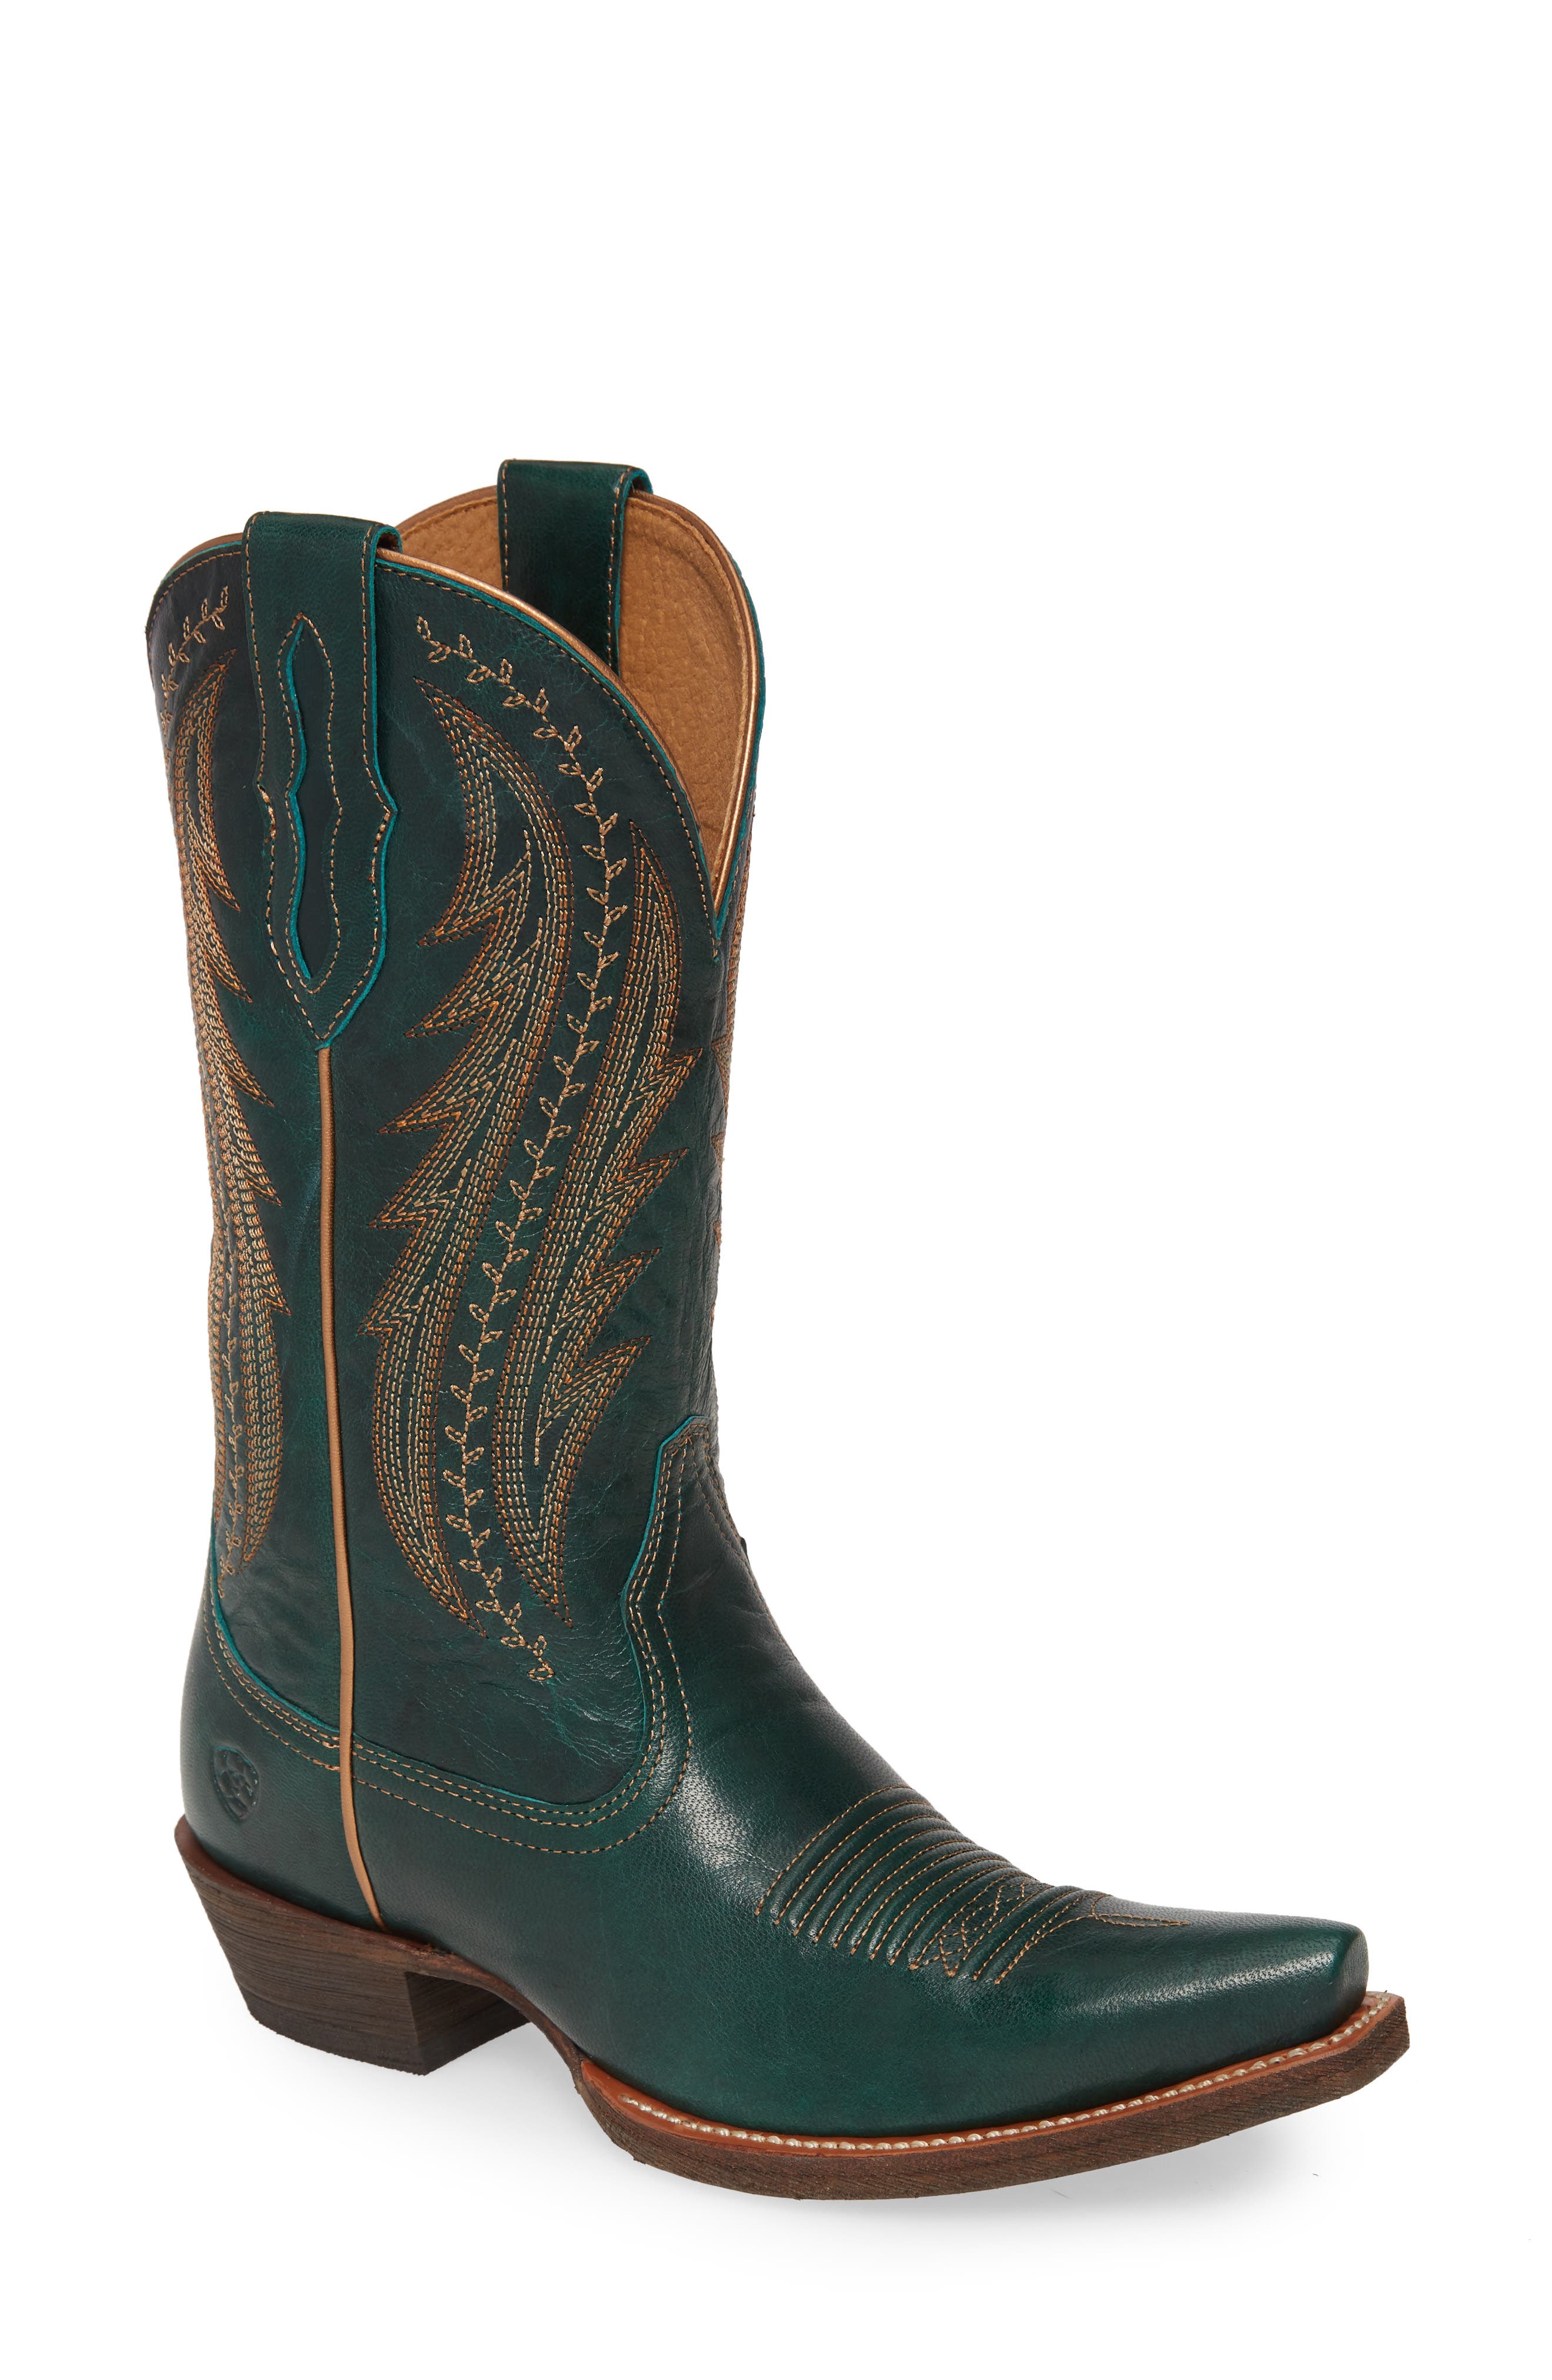 Women's Ariat Tailgate Western Boot, Size 6 M - Green